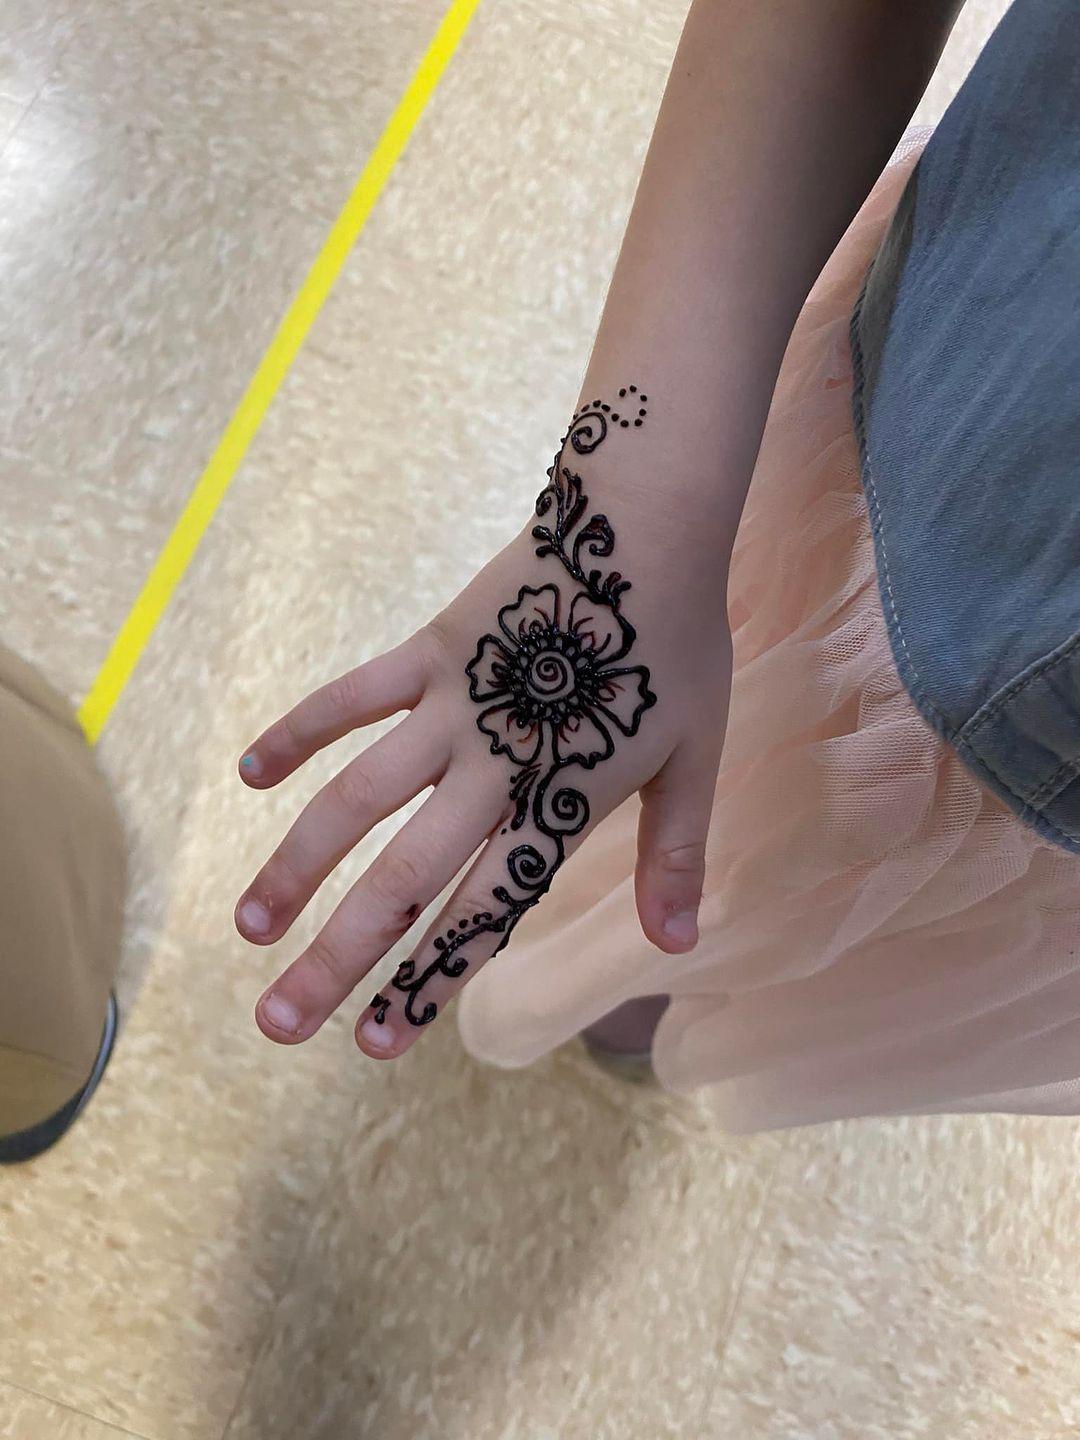 Tattoo uploaded by Shali J  Mini henna tattoos are perfect for adding just  a little something to your aesthetic No matter what trend you are into  these days weve got something